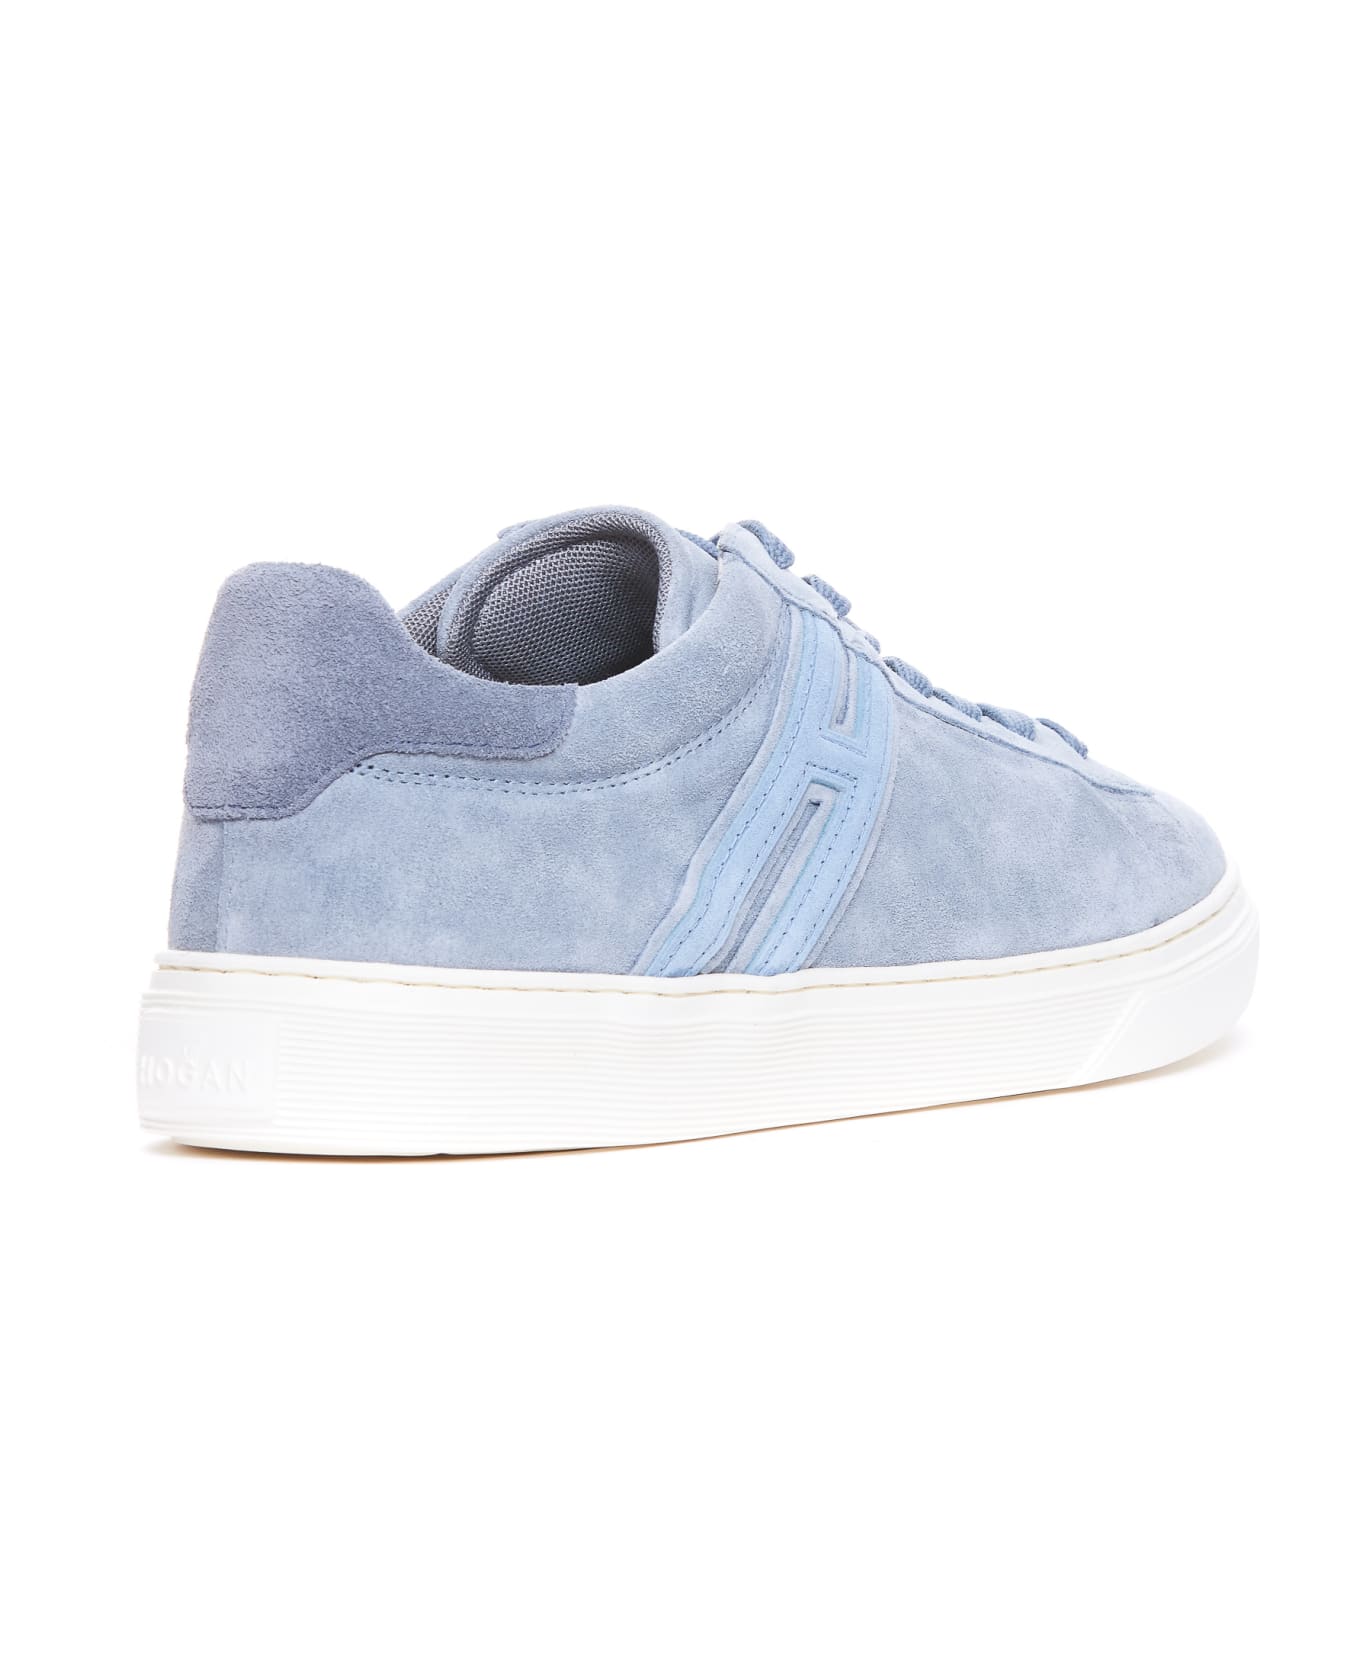 Hogan H365 Laced H Sneakers - Blue